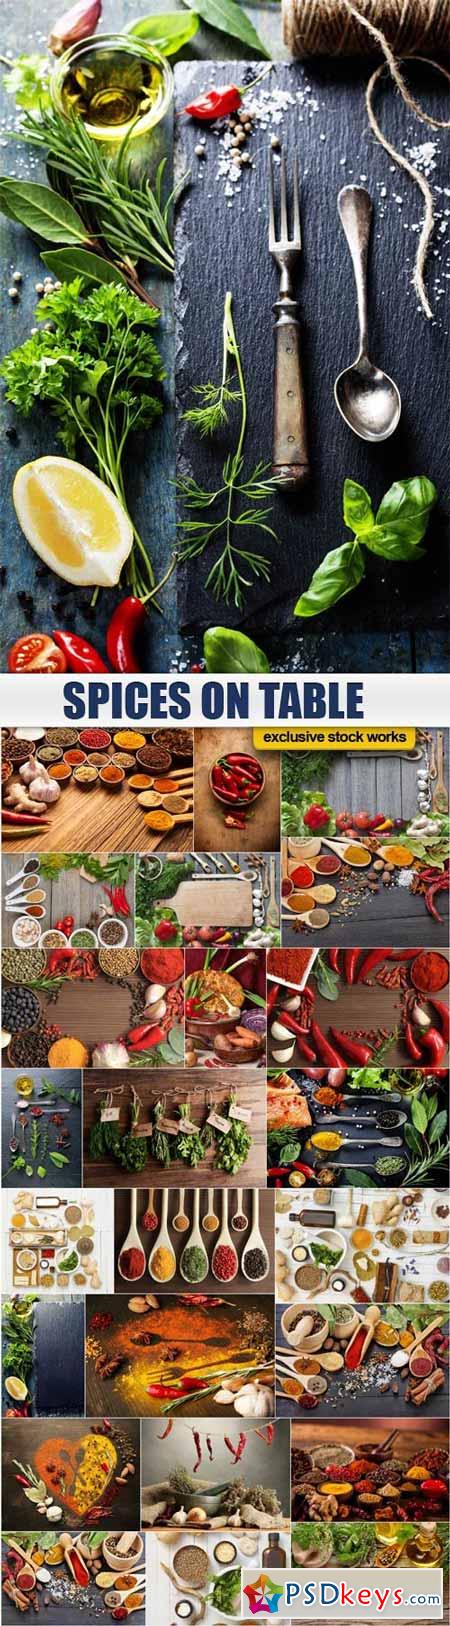 Spices on Table - 25x JPEGs